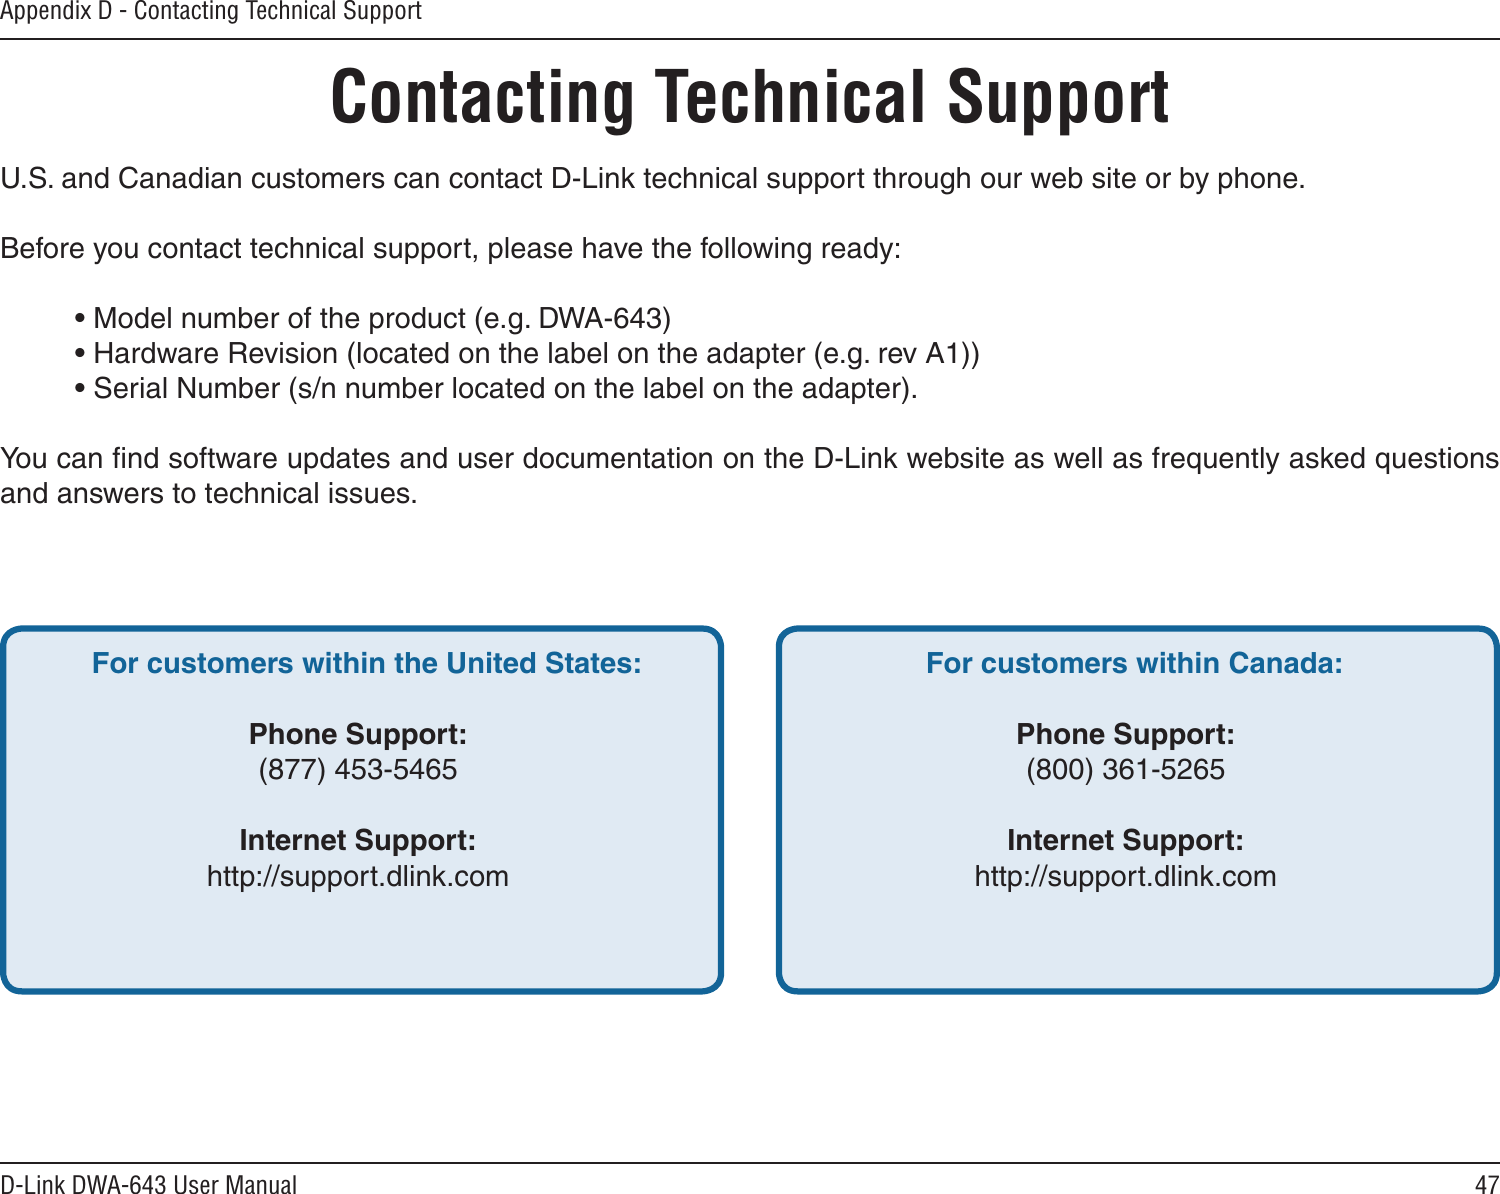 47D-Link DWA-643 User ManualAppendix D - Contacting Technical SupportContacting Technical SupportU.S. and Canadian customers can contact D-Link technical support through our web site or by phone.Before you contact technical support, please have the following ready:  • Model number of the product (e.g. DWA-643)  • Hardware Revision (located on the label on the adapter (e.g. rev A1))  • Serial Number (s/n number located on the label on the adapter). You can ﬁnd software updates and user documentation on the D-Link website as well as frequently asked questions and answers to technical issues.For customers within the United States: Phone Support:(877) 453-5465Internet Support:http://support.dlink.com For customers within Canada: Phone Support:(800) 361-5265 Internet Support:http://support.dlink.com 